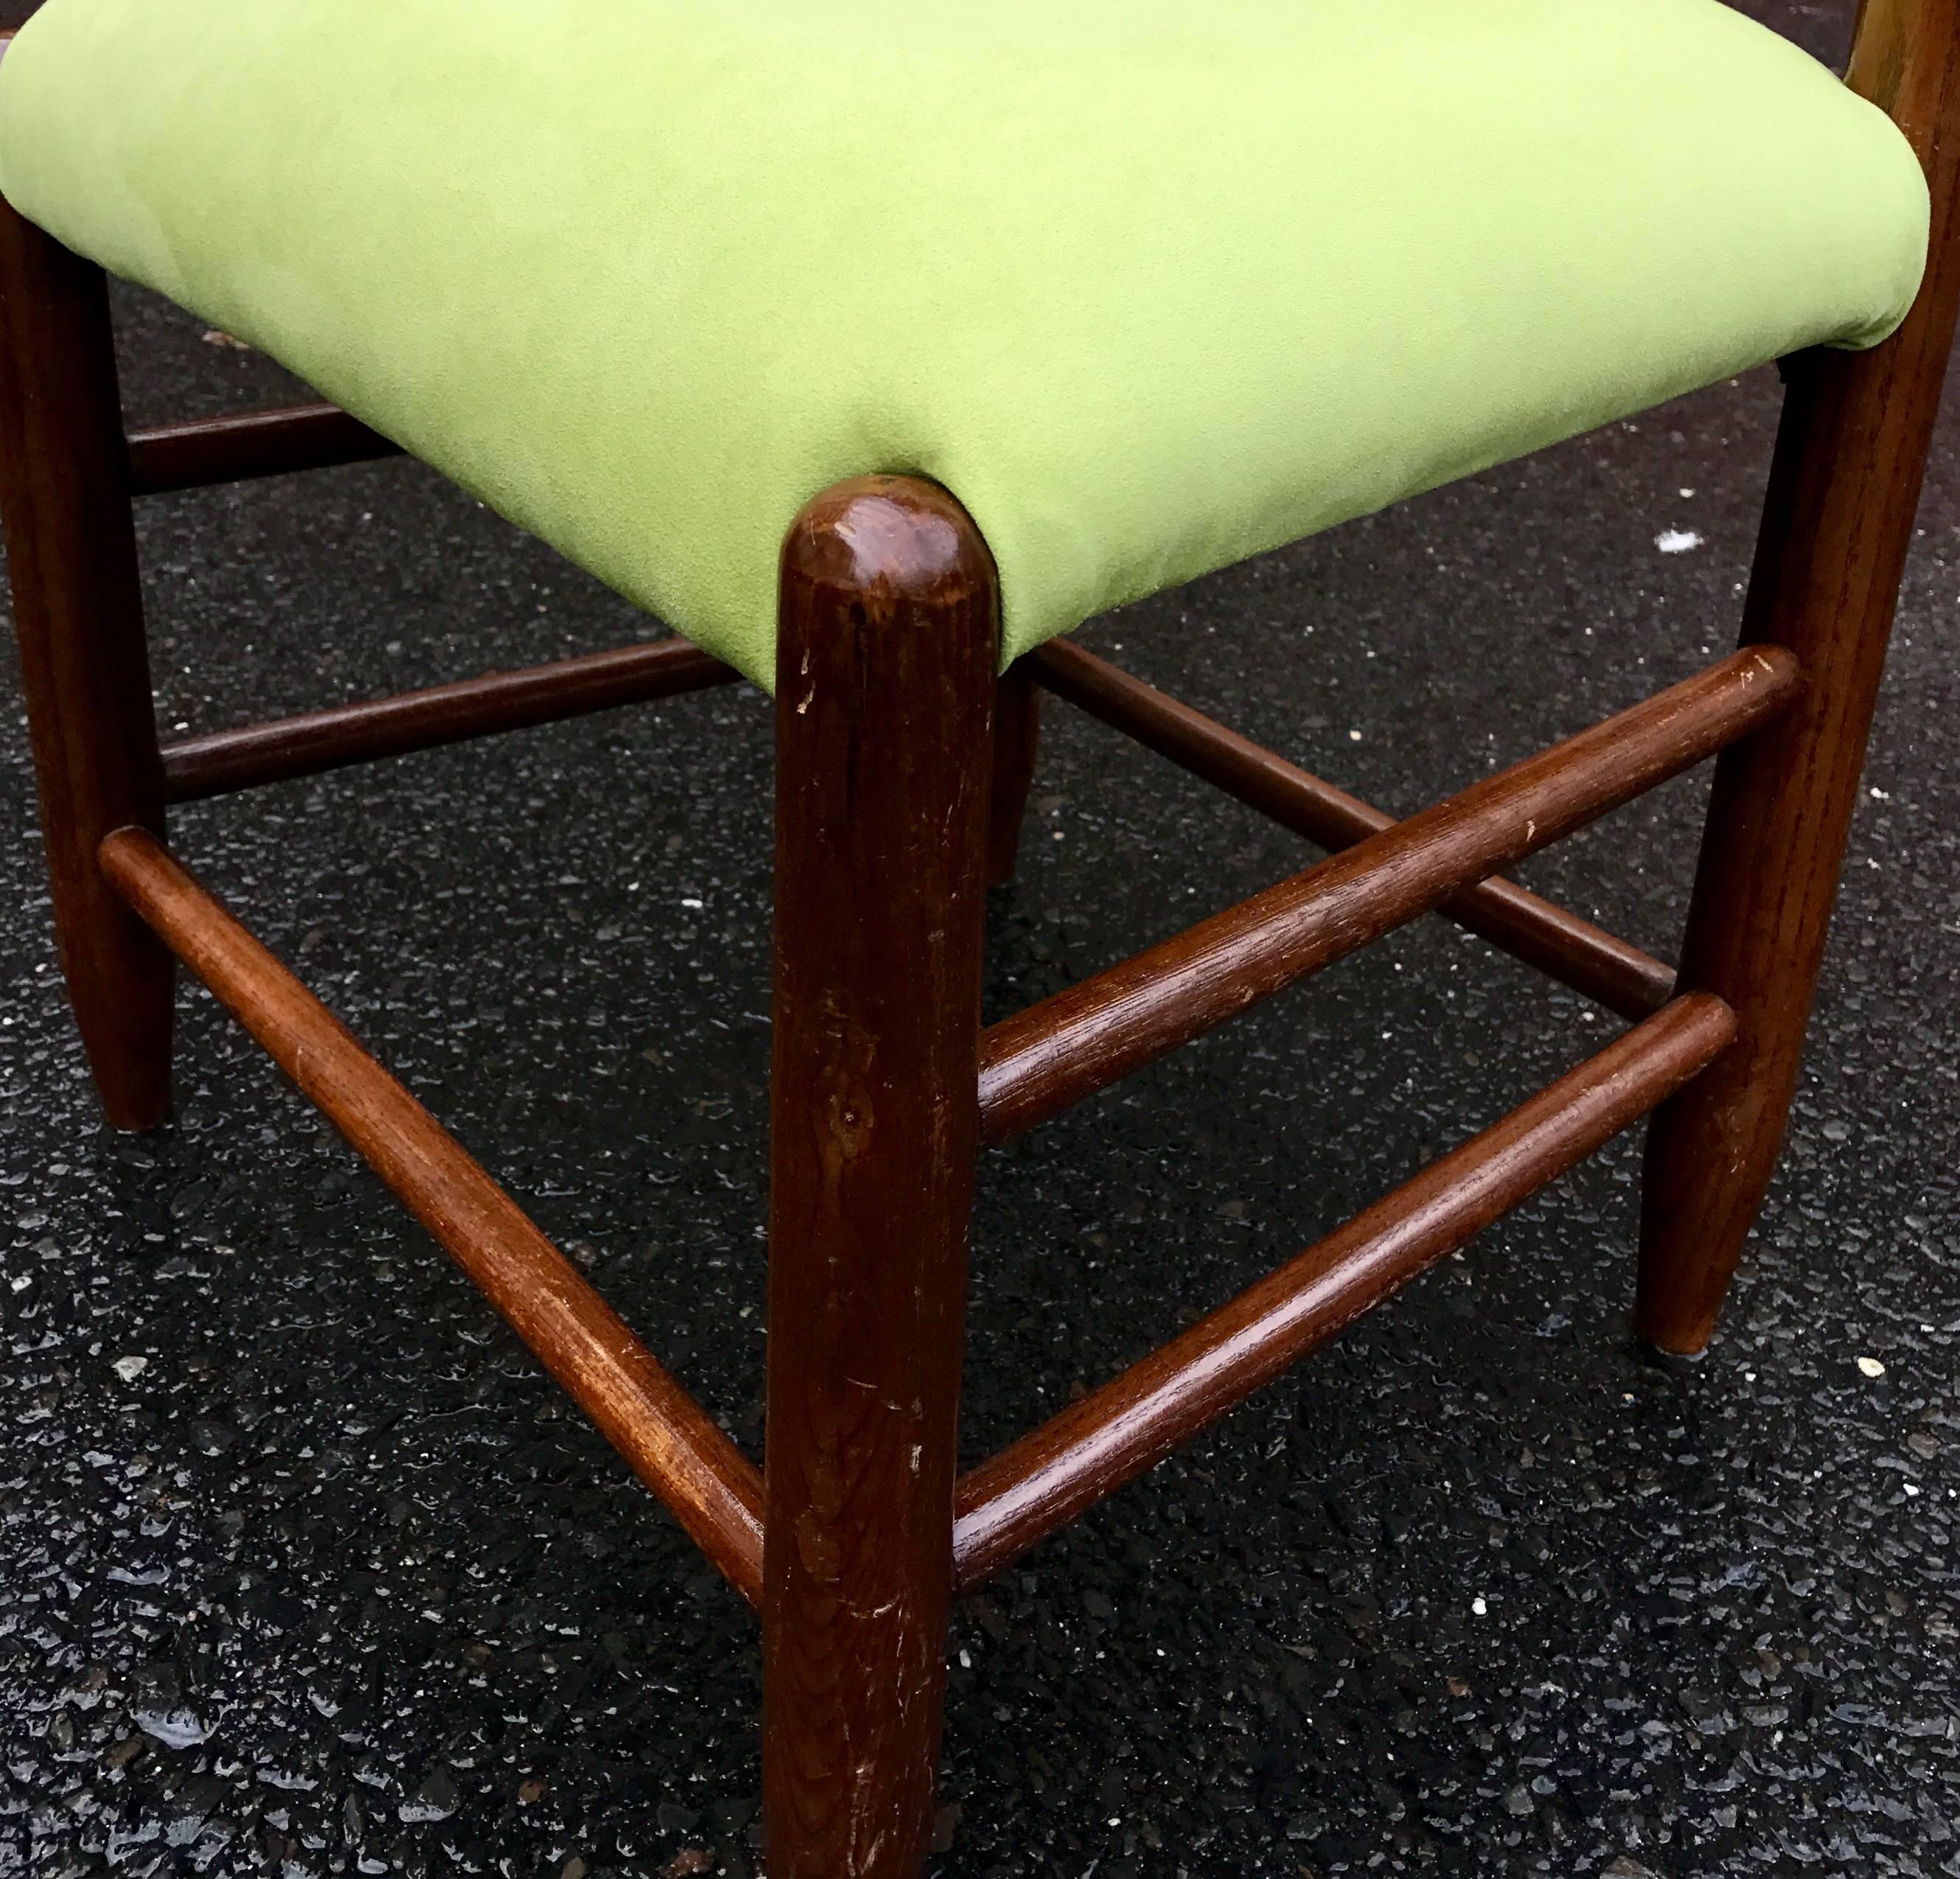 Mid-Century Modern Italian Wooden Valet Chair With Green Faux Suede Fabric In Good Condition For Sale In Haddonfield, NJ